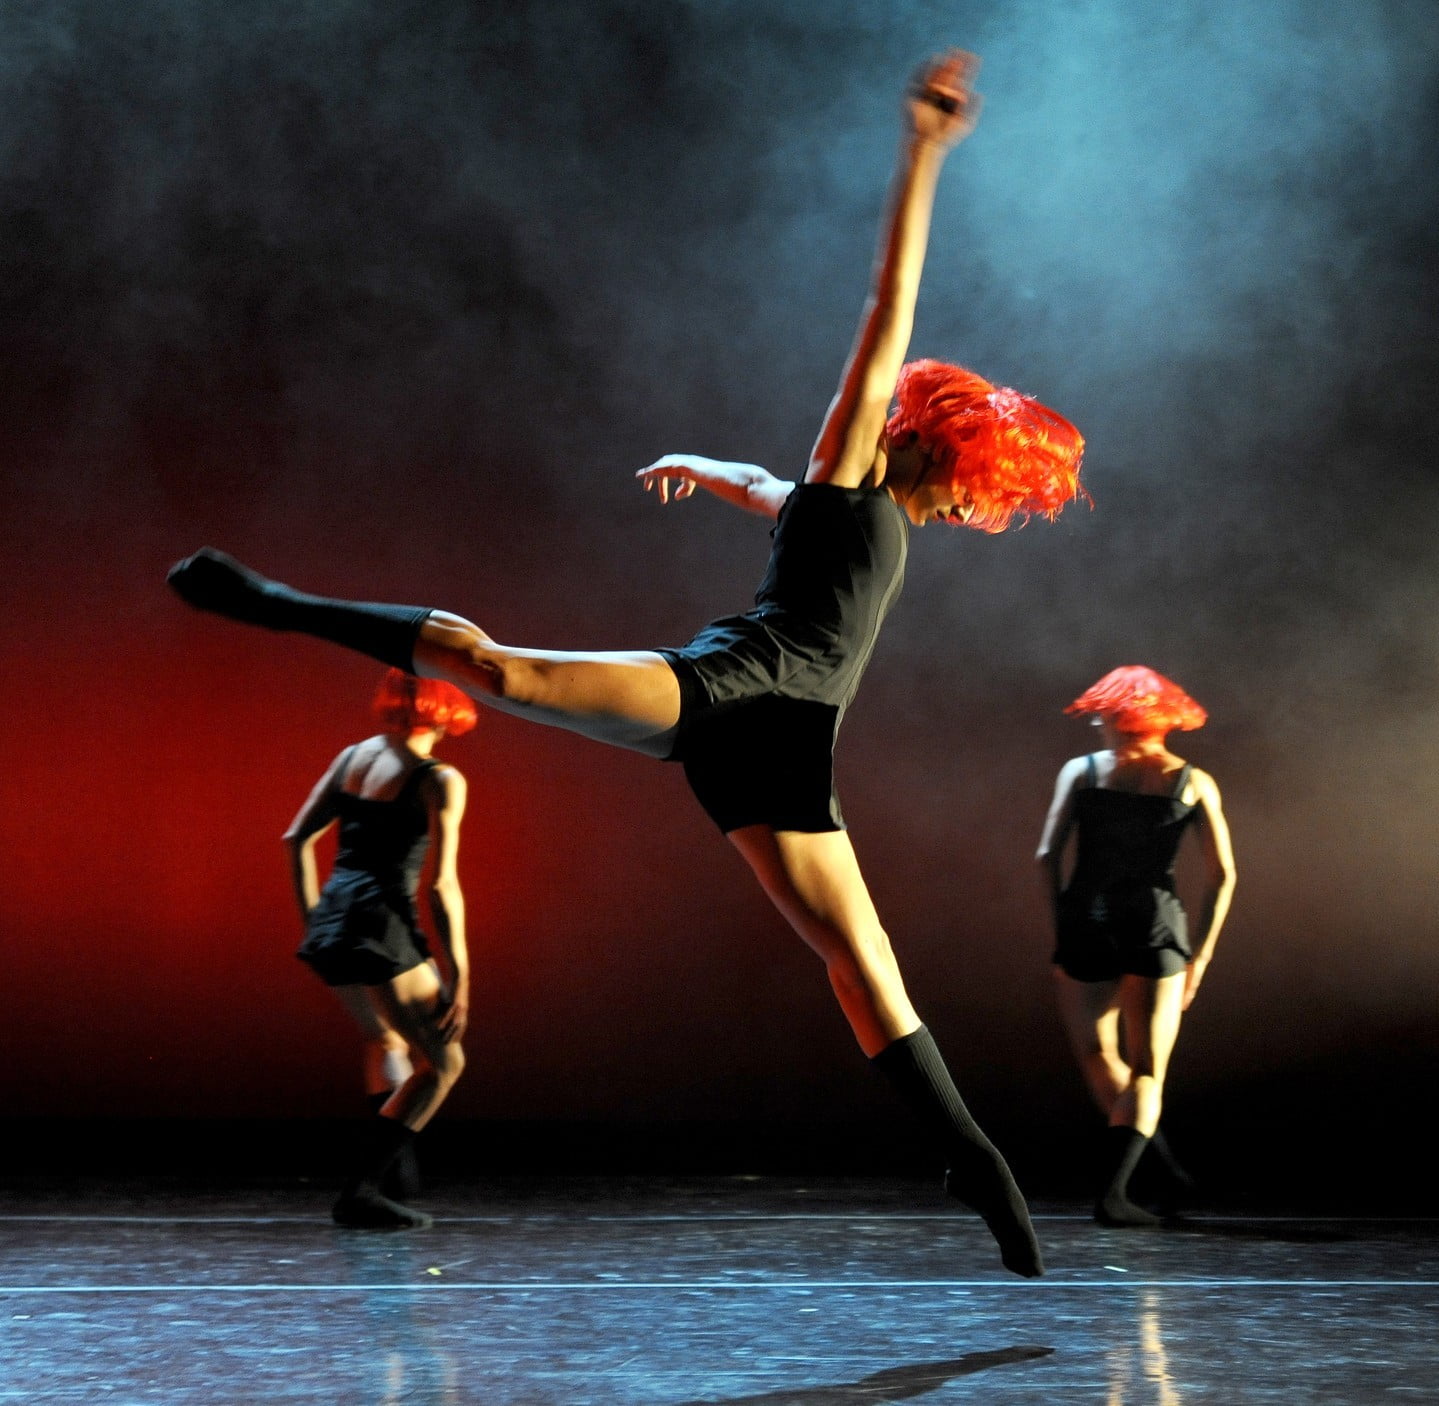 Dynamic shot of dancers from Ballet Hispánico performing on stage.